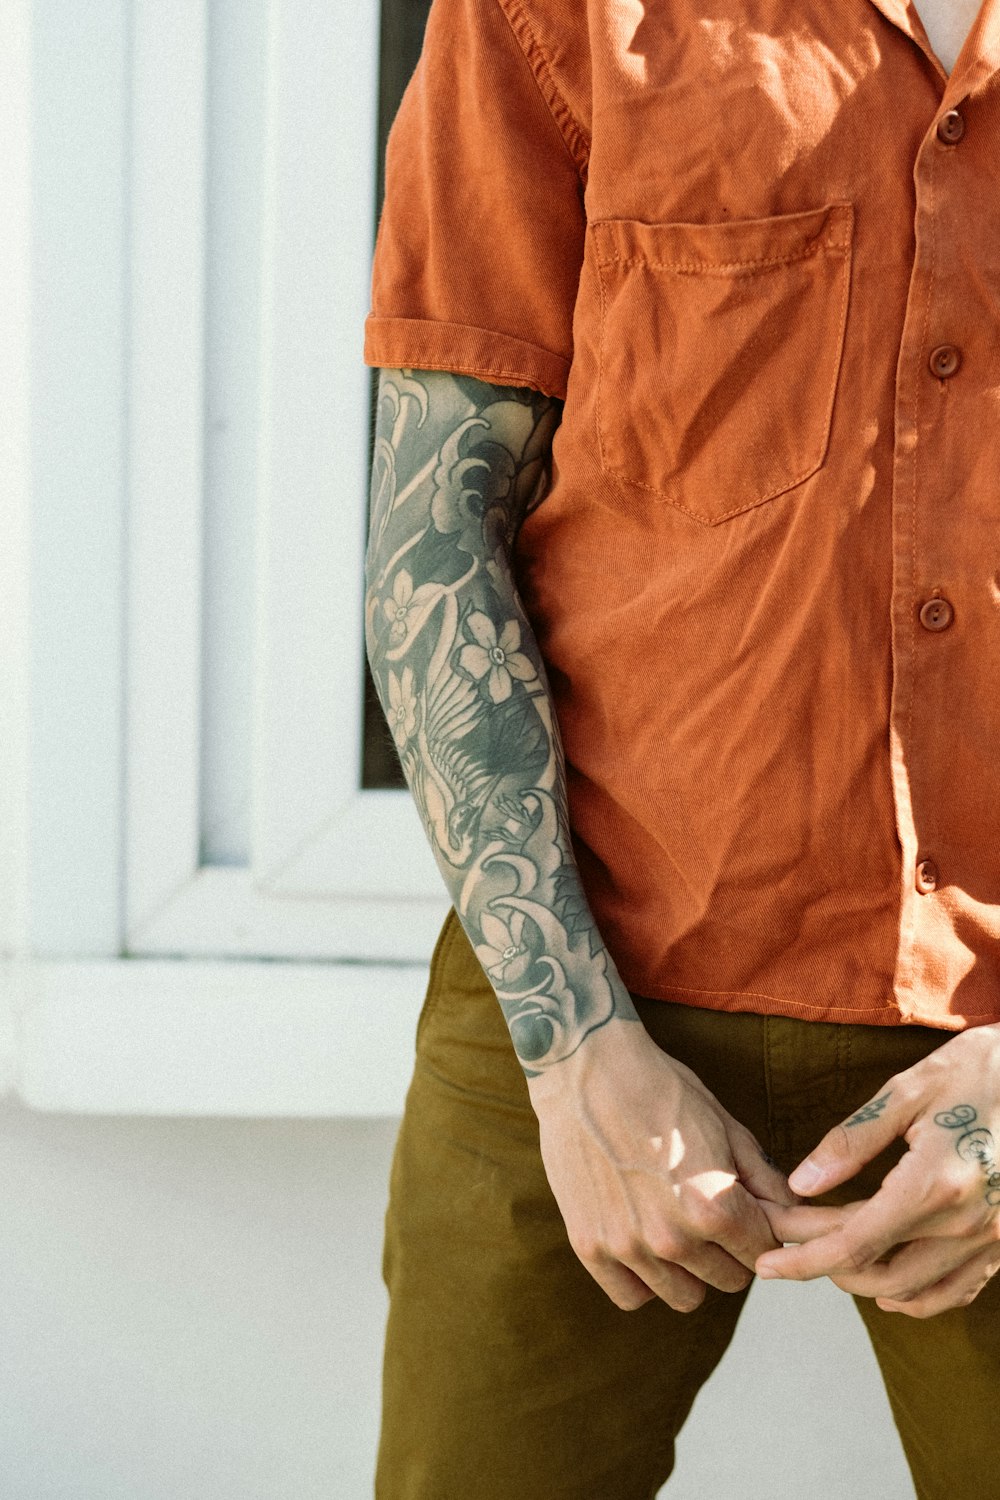 man in orange button up shirt with black and gray arm tattoo